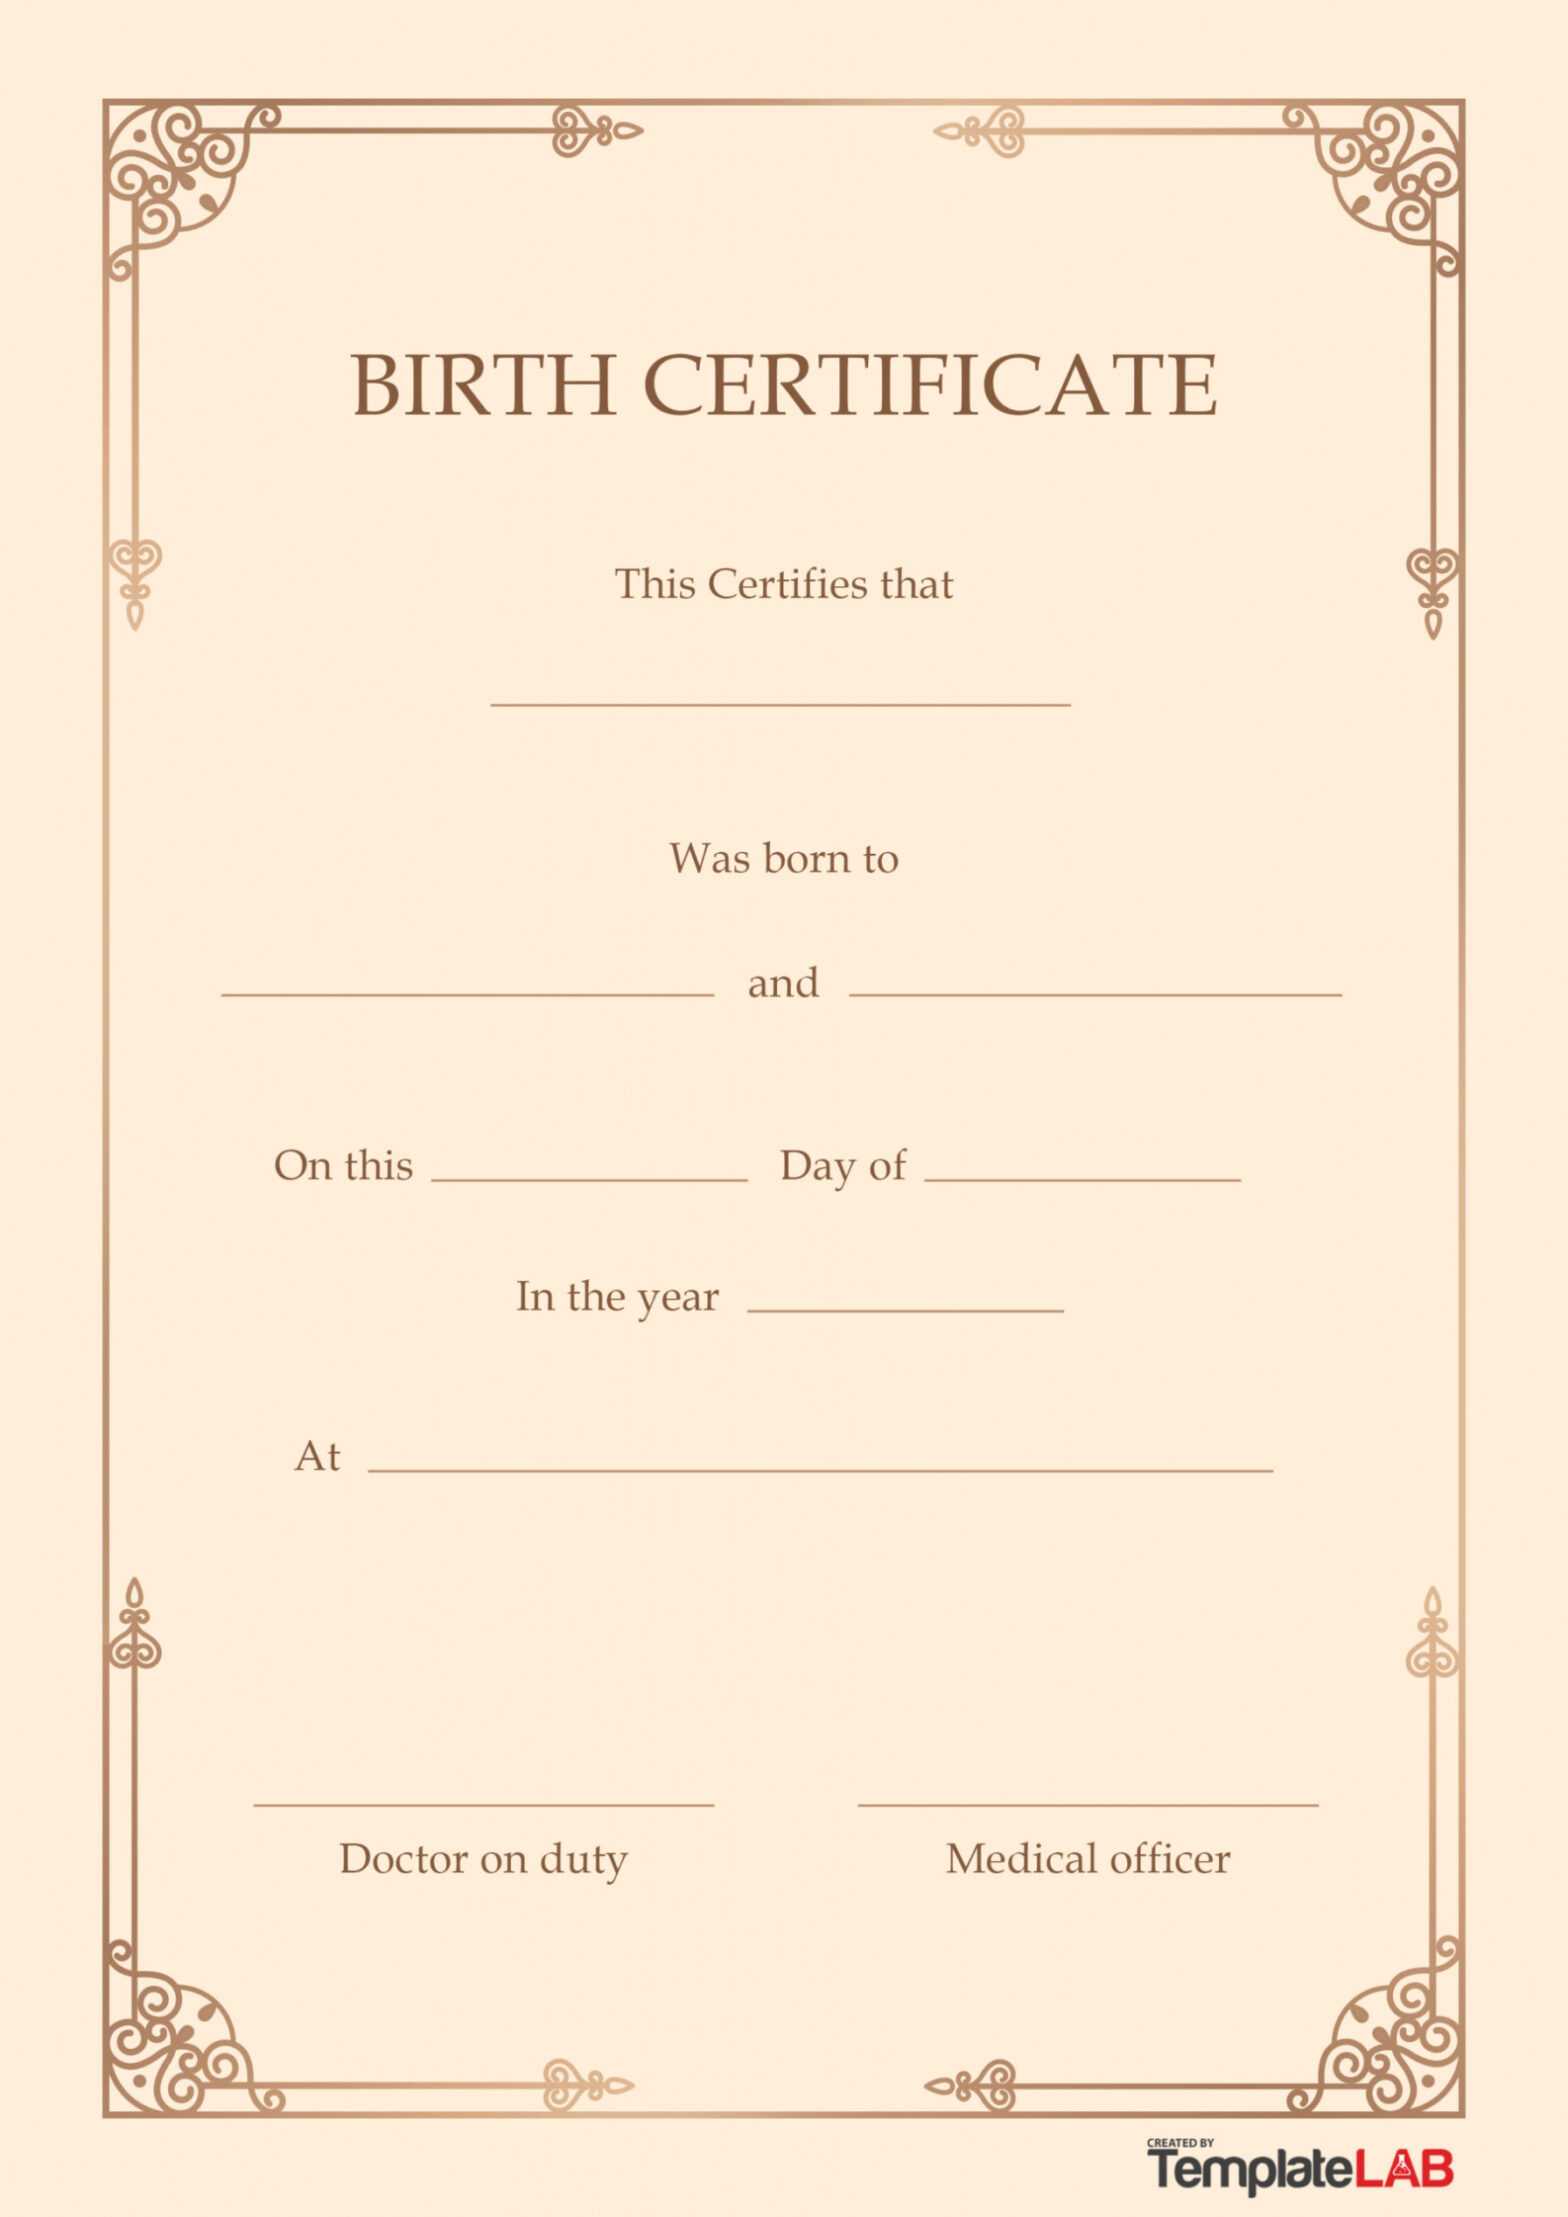 15 Birth Certificate Templates (Word &amp; Pdf) ᐅ Templatelab with regard to Birth Certificate Templates For Word